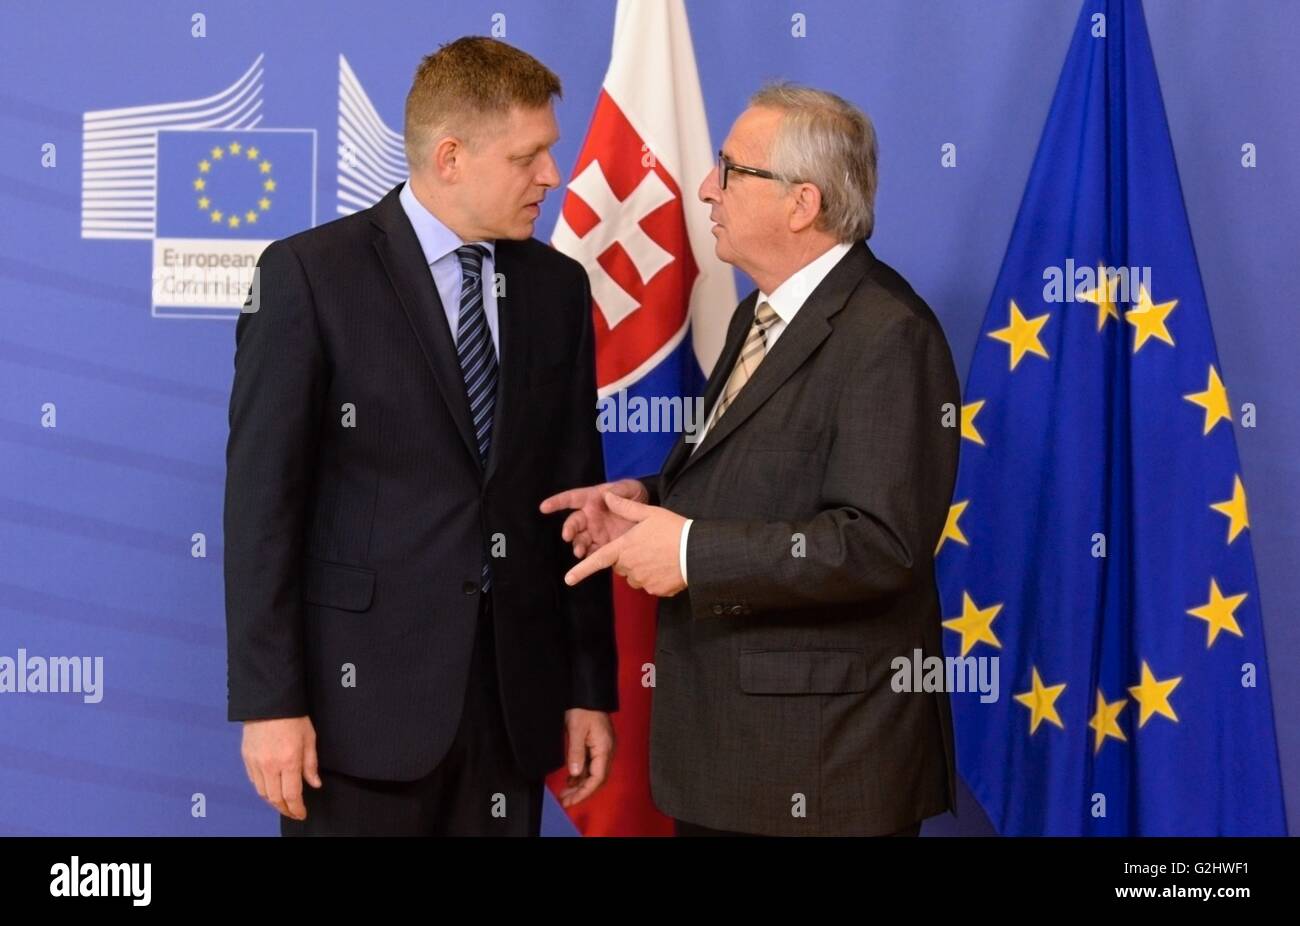 Brussels, Belgium. 01st June, 2016. Slovak Prime Minister Robert Fico (left) talks with EC President Jean-Claude Juncker (right) and European Council President Donald Tusk (not pictured) in Brussels, Belgium, June 1, 2016. In early July, the Netherlands will pass its EU presidency to Slovakia. Credit:  Jakub Dospiva/CTK Photo/Alamy Live News Stock Photo